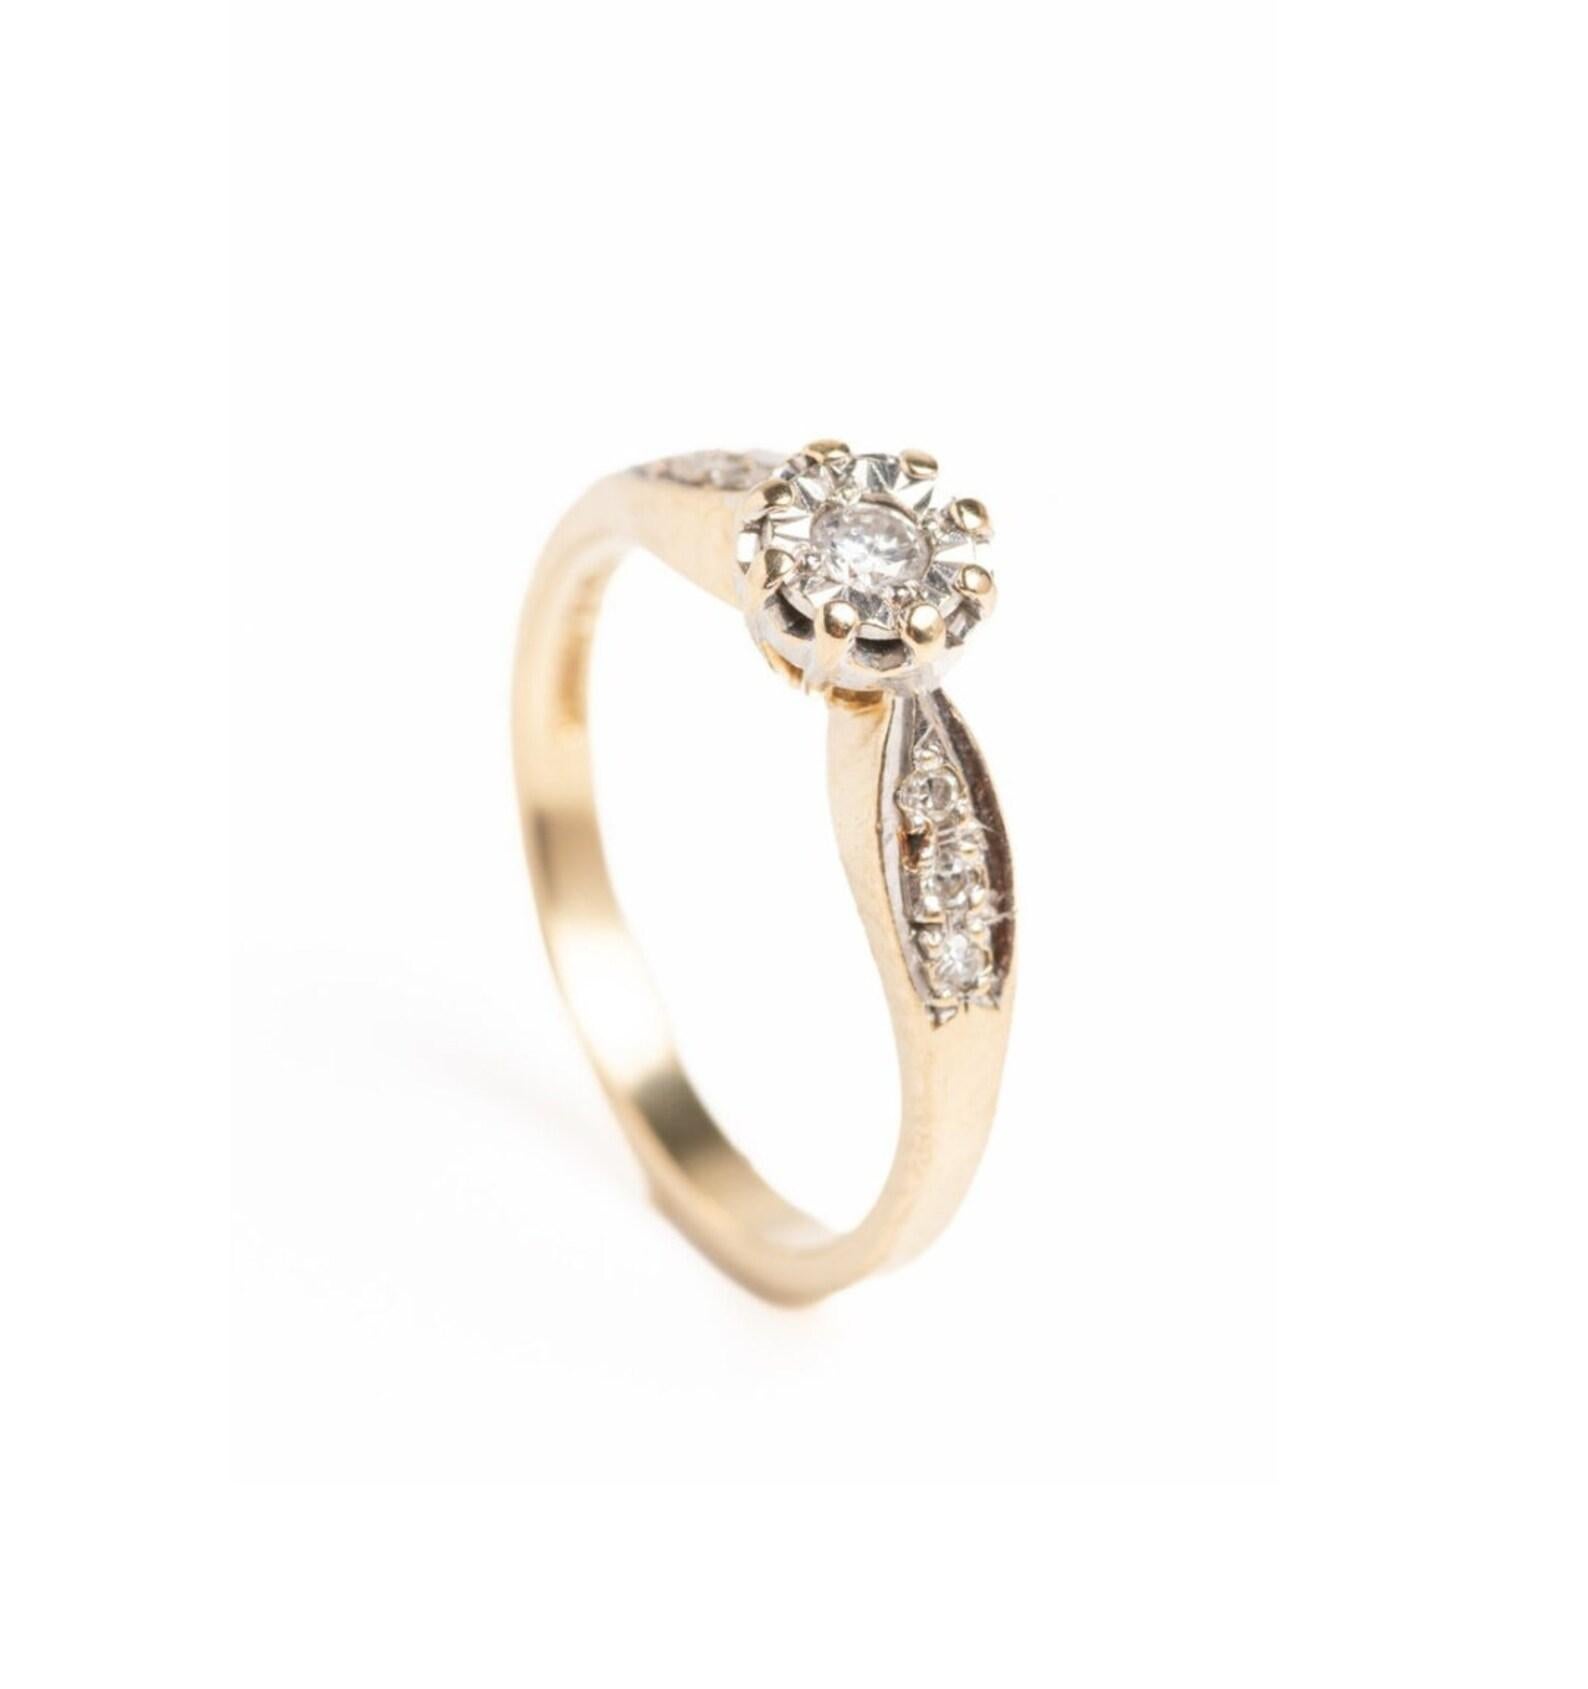 Women's Vintage 9ct Gold Diamond Ring For Sale